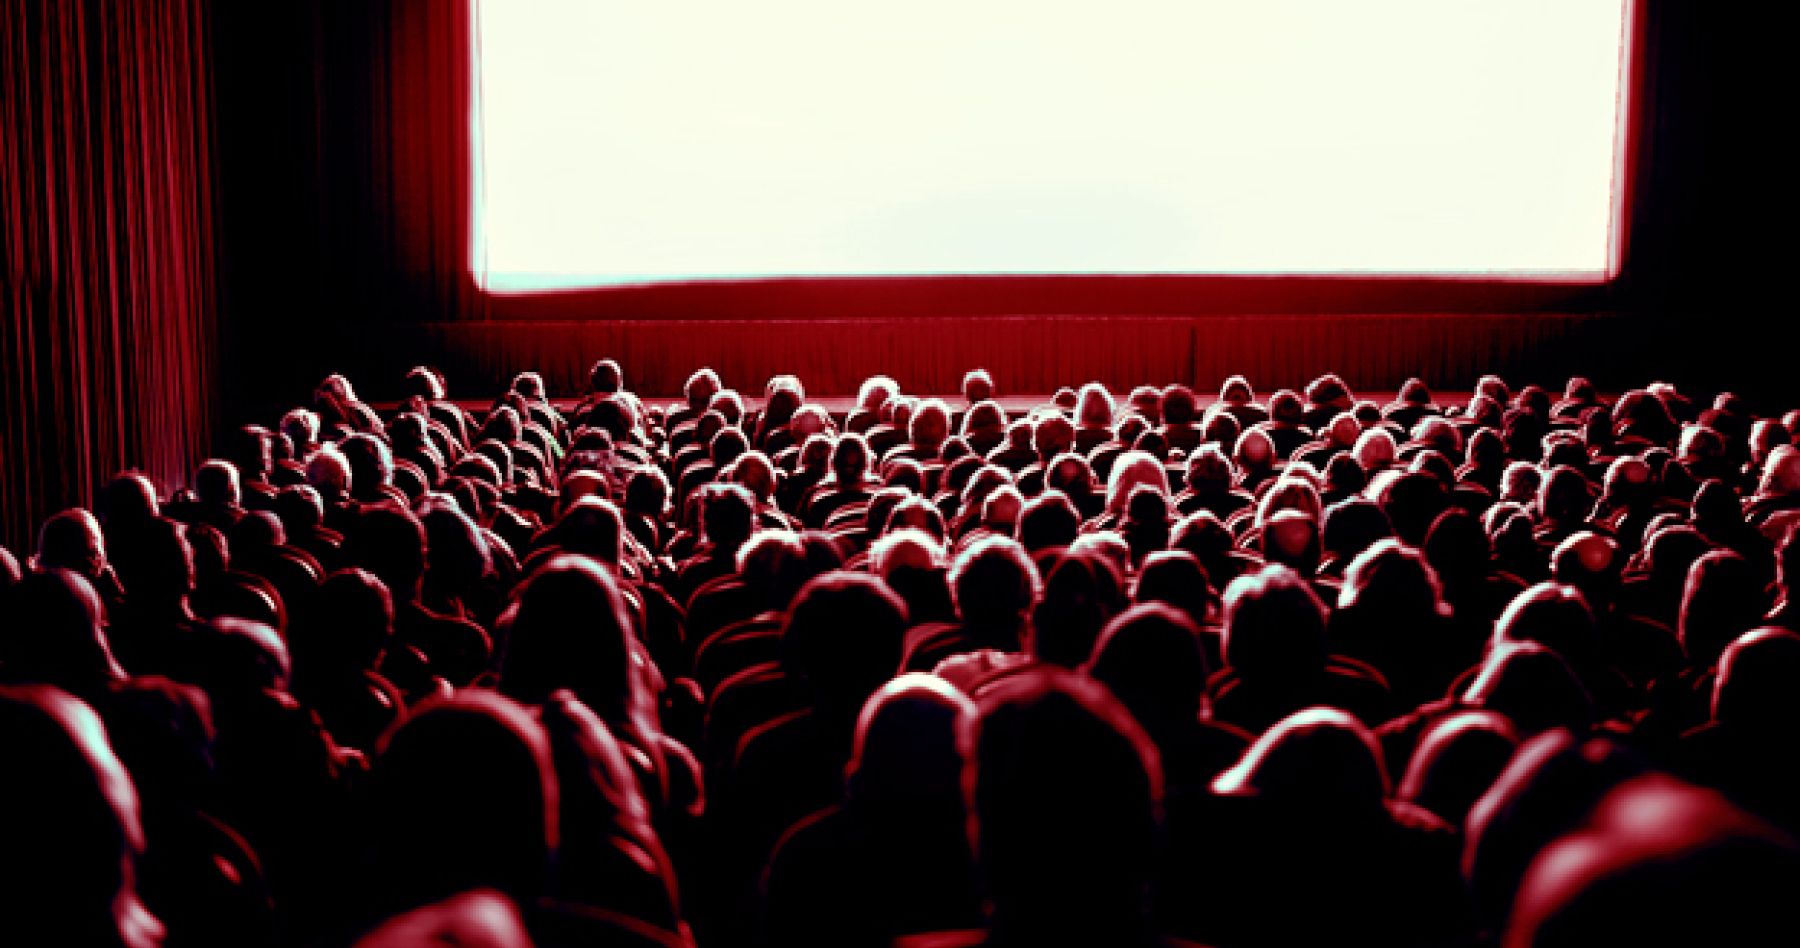 Nearly 50% of Americans Plan to Avoid Movie Theaters Upon Reopening Claims New Study